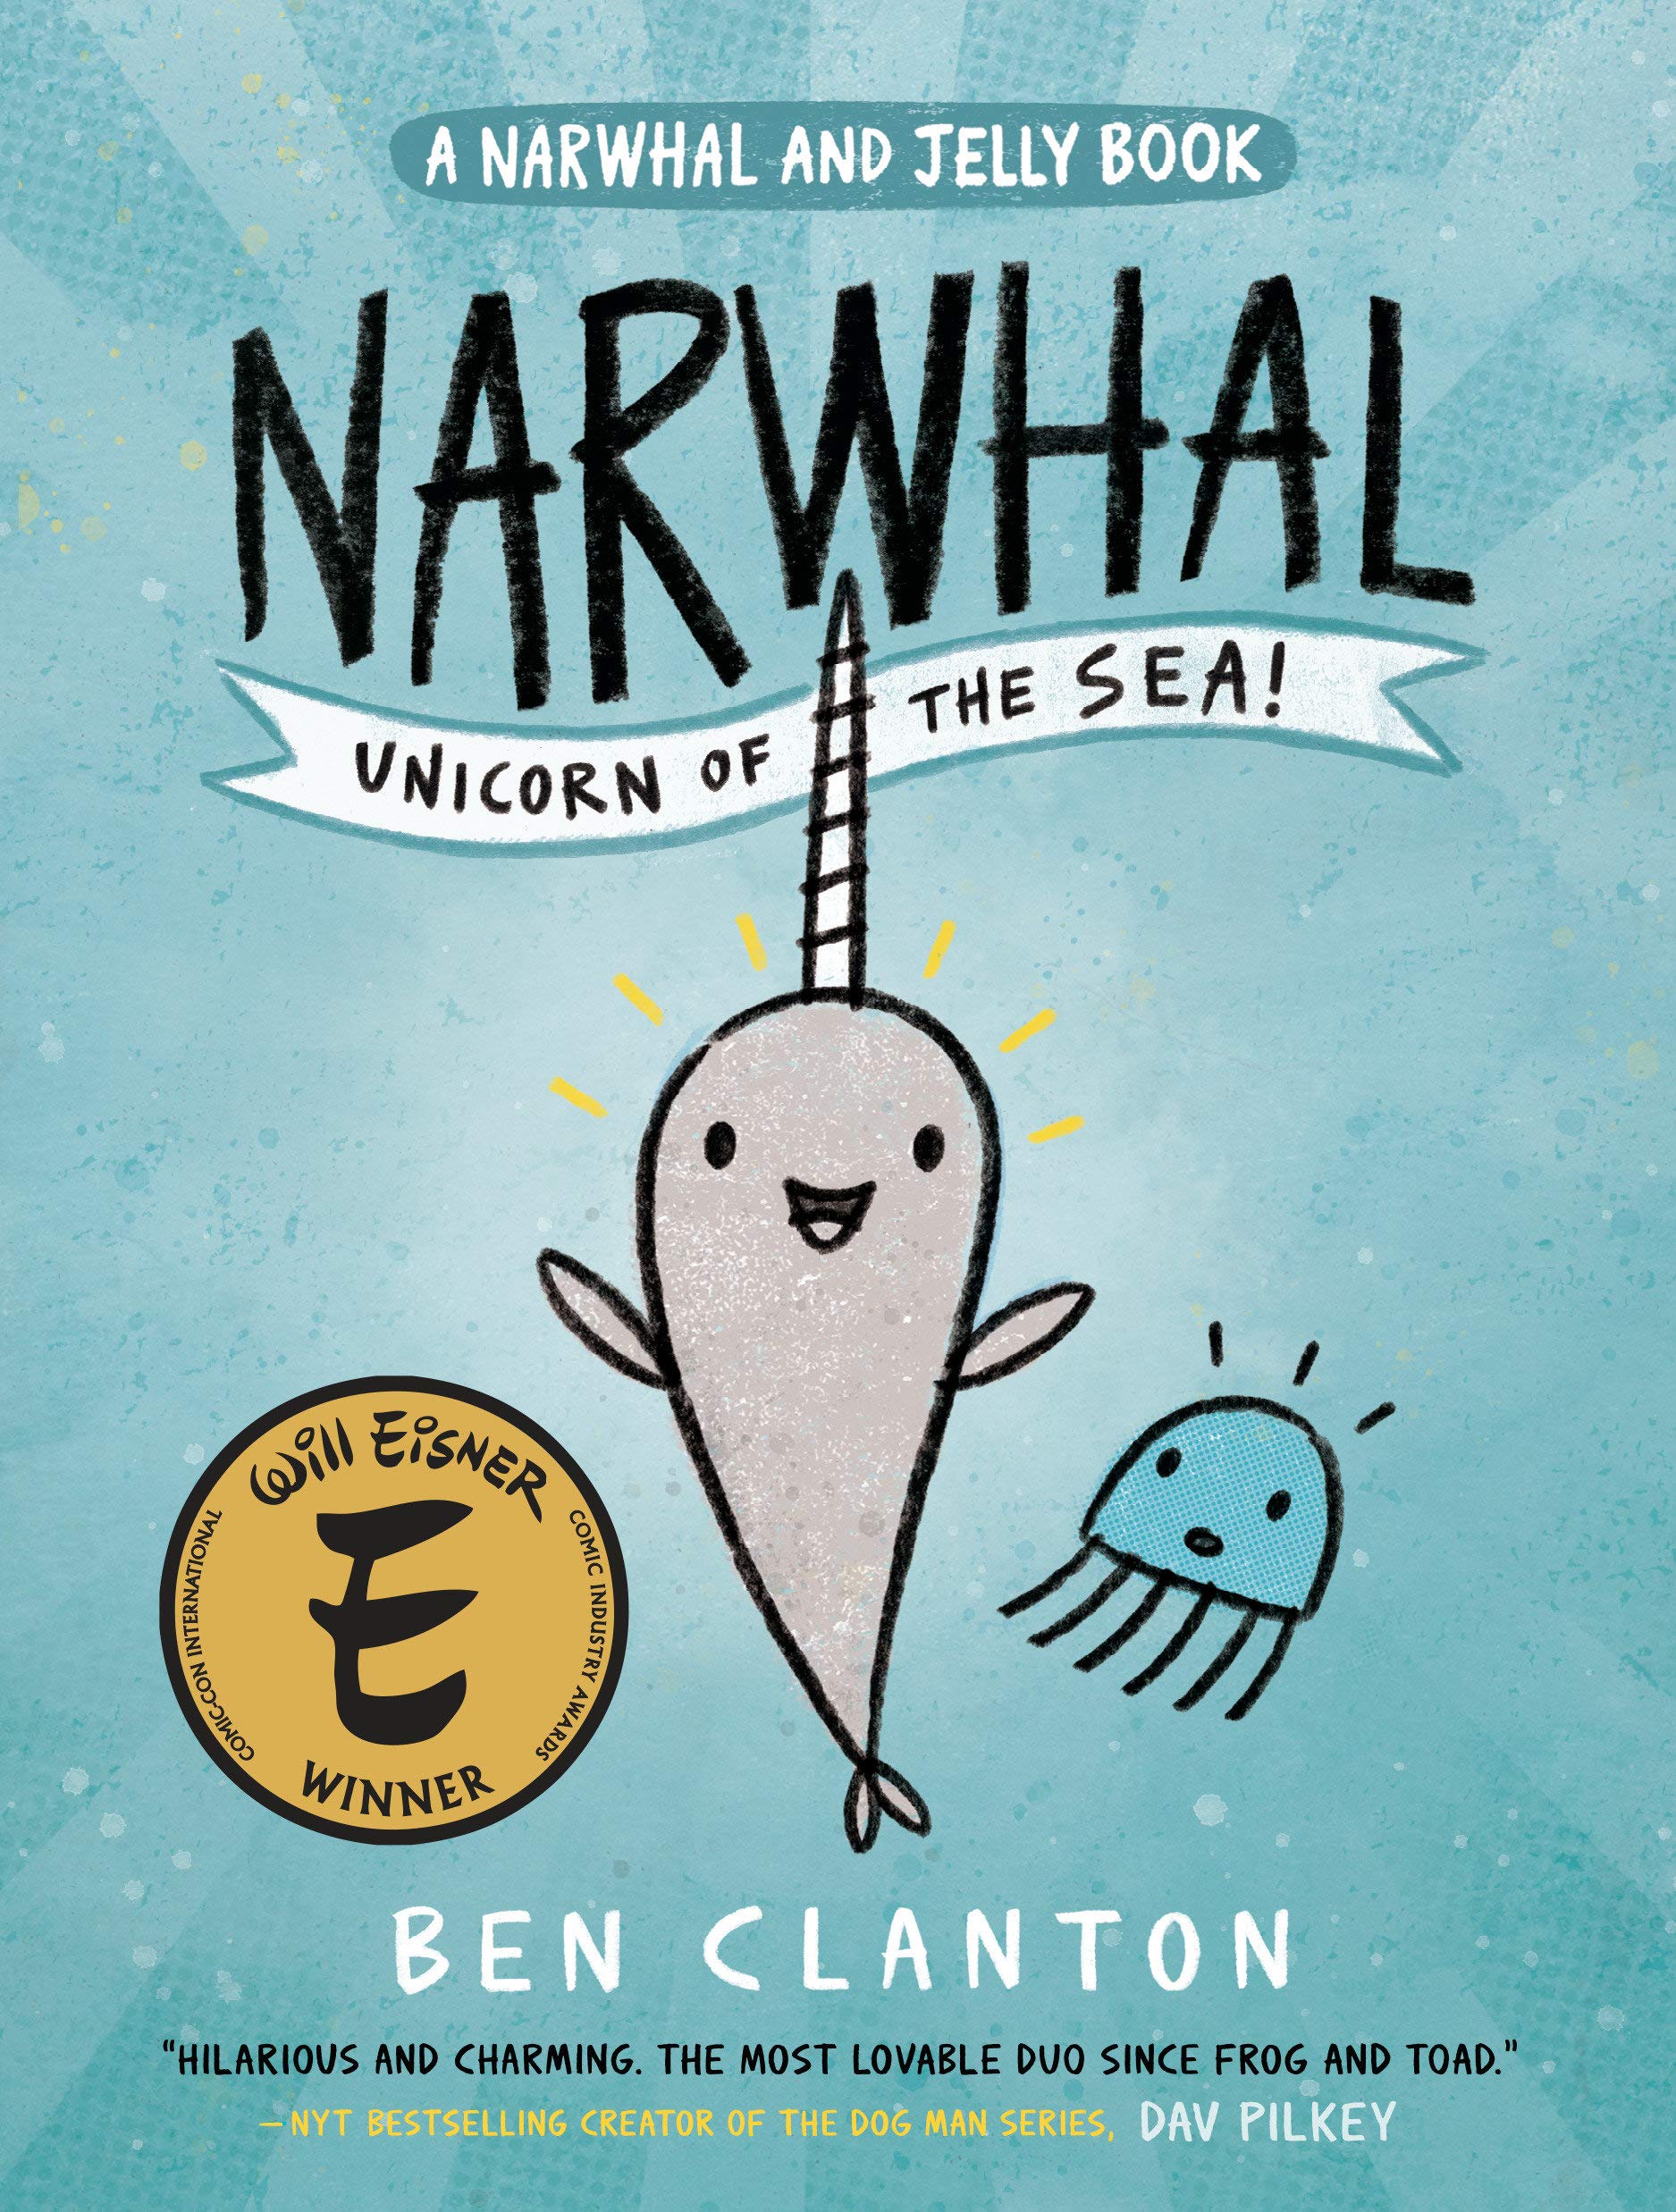 Narwhal Jelly book cover